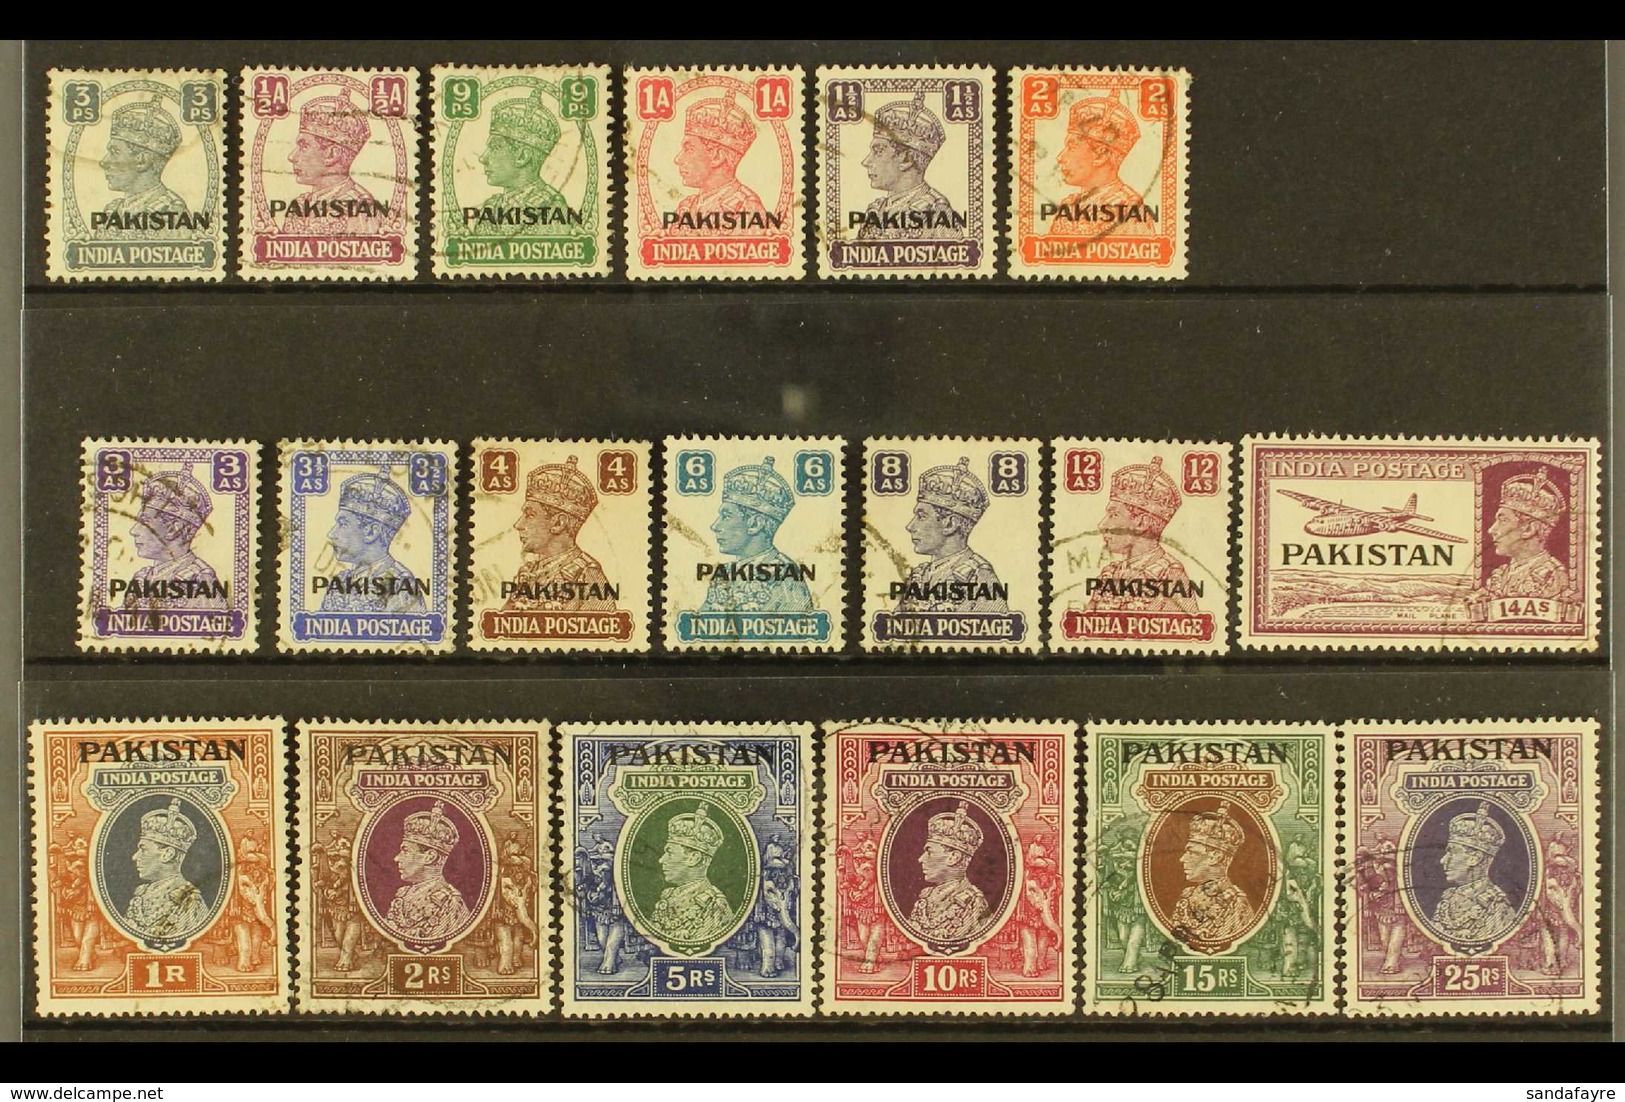 1948 KGV Of India Opt'd Complete Set, SG 1/19, 15r With A Short Perf, The Rest Are Fine Used (19 Stamps) For More Images - Pakistan